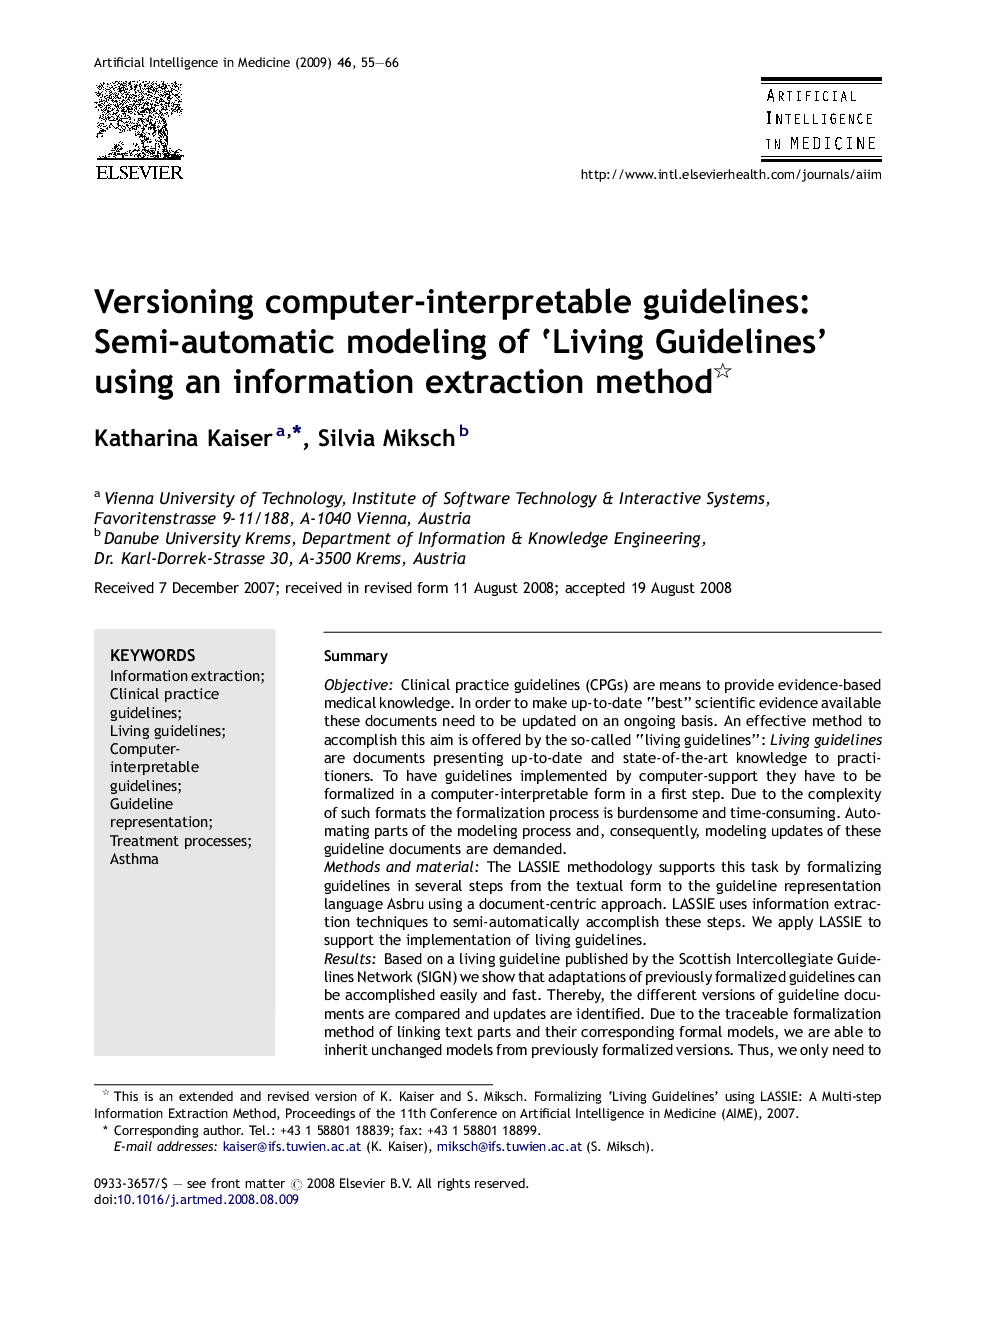 Versioning computer-interpretable guidelines: Semi-automatic modeling of ‘Living Guidelines’ using an information extraction method 